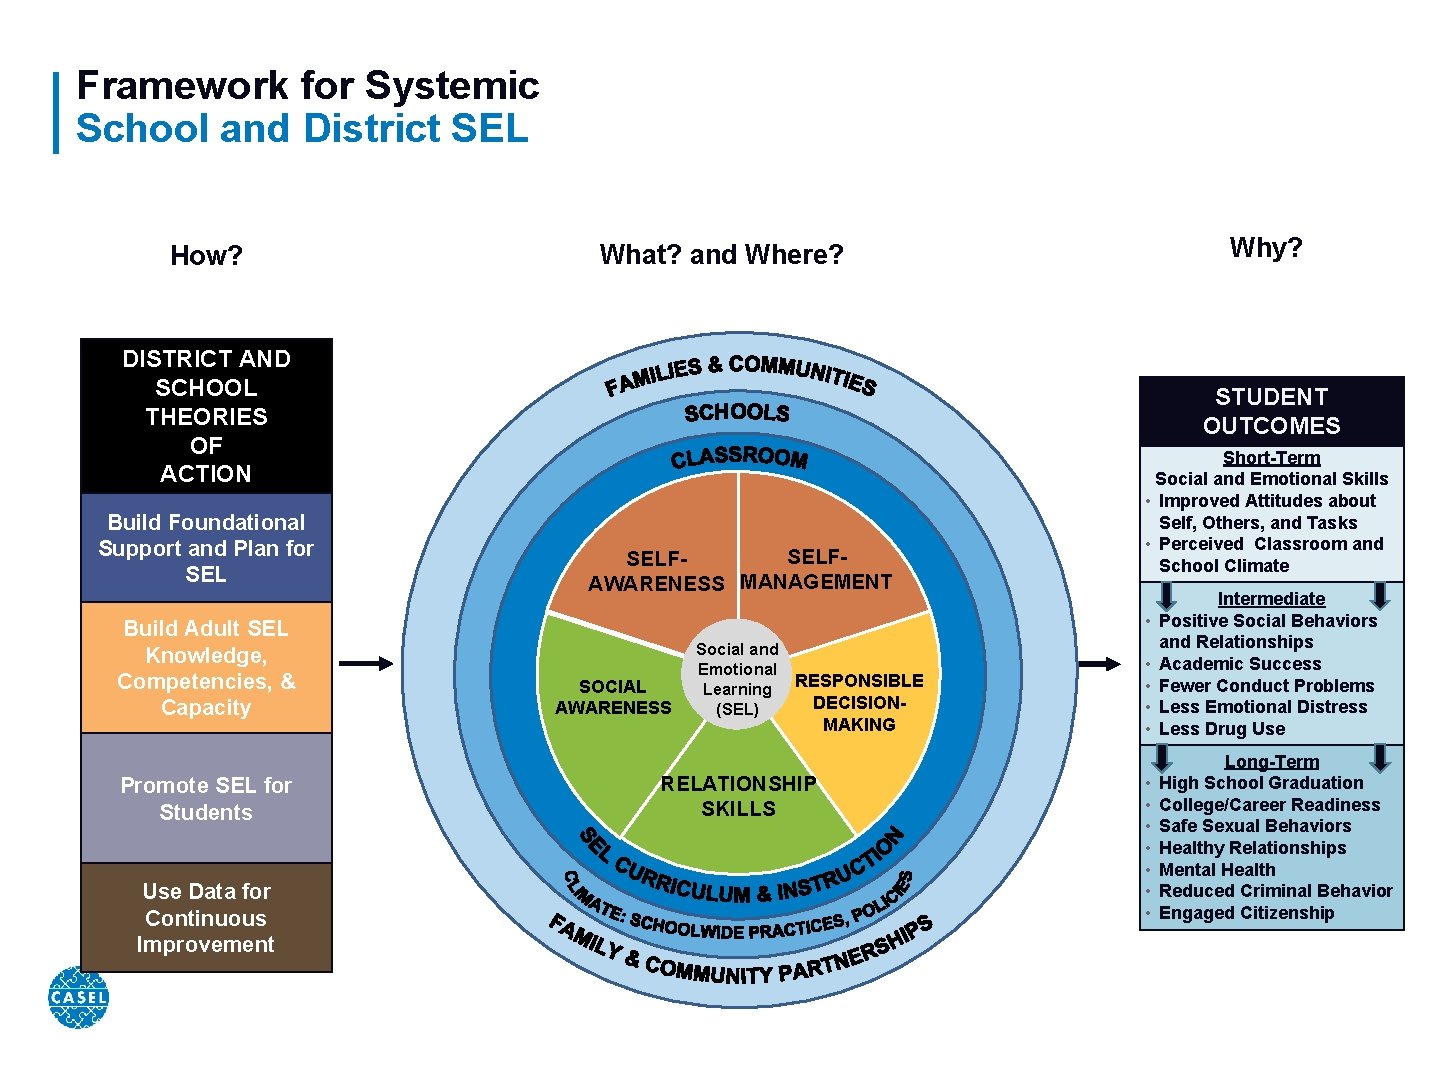 Framework for Systemic School and District SEL How? DISTRICT AND SCHOOL THEORIES OF ACTION